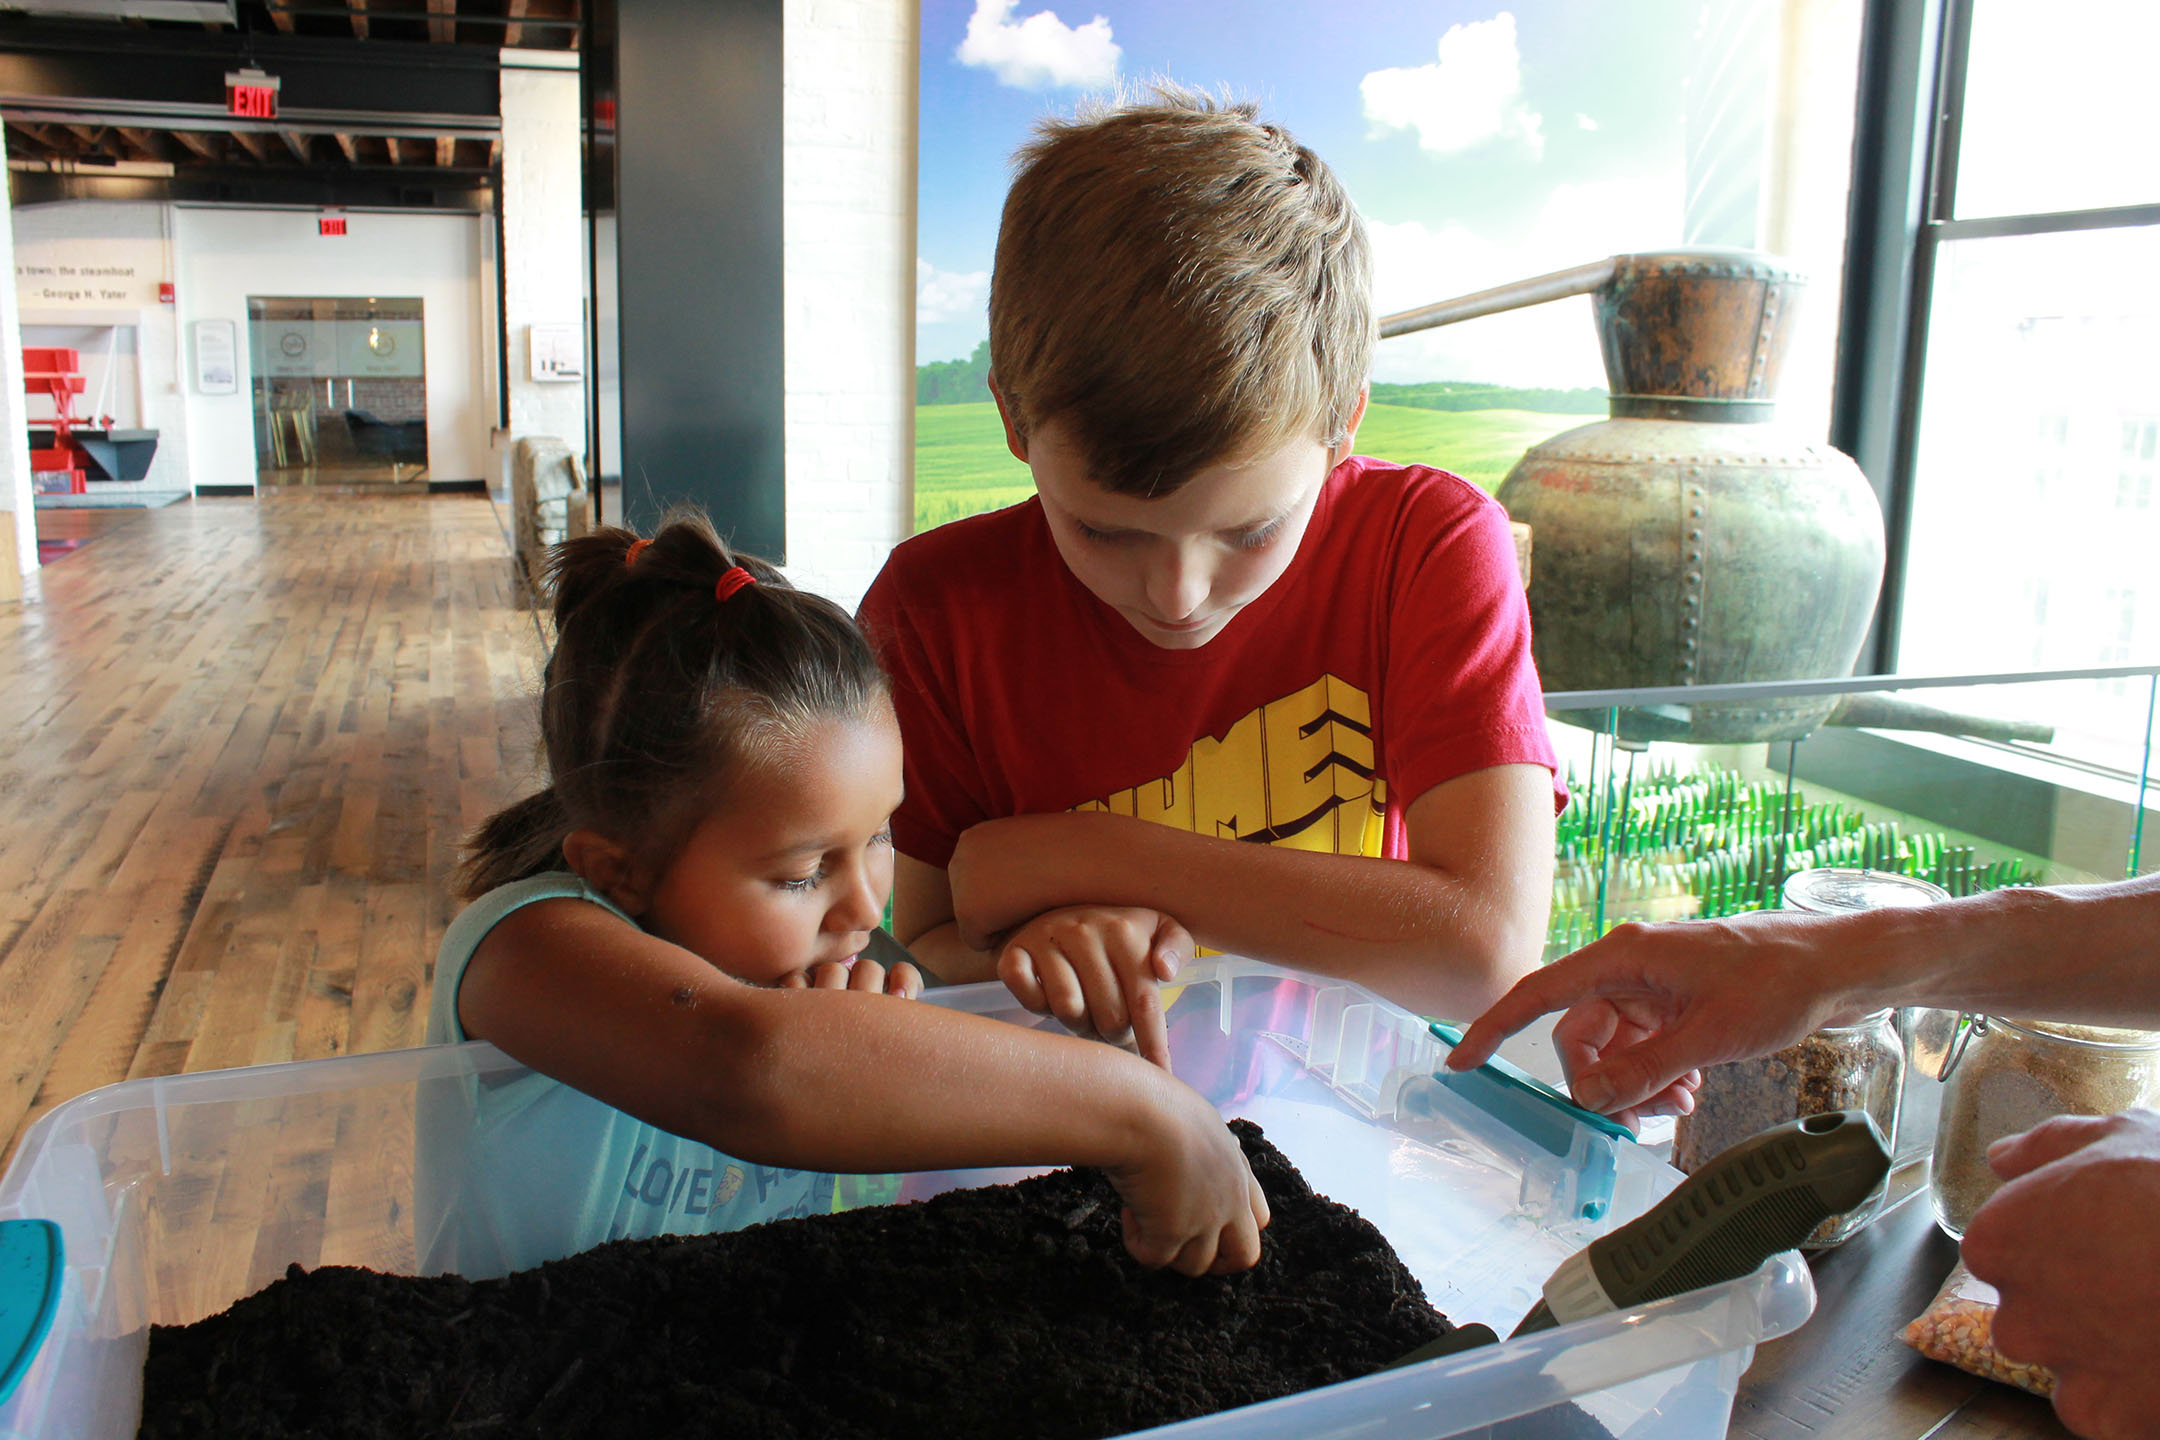 Students enjoy the hands-on soil cart in The Spirit of Kentucky® exhibit at the Frazier History Museum in Louisville.